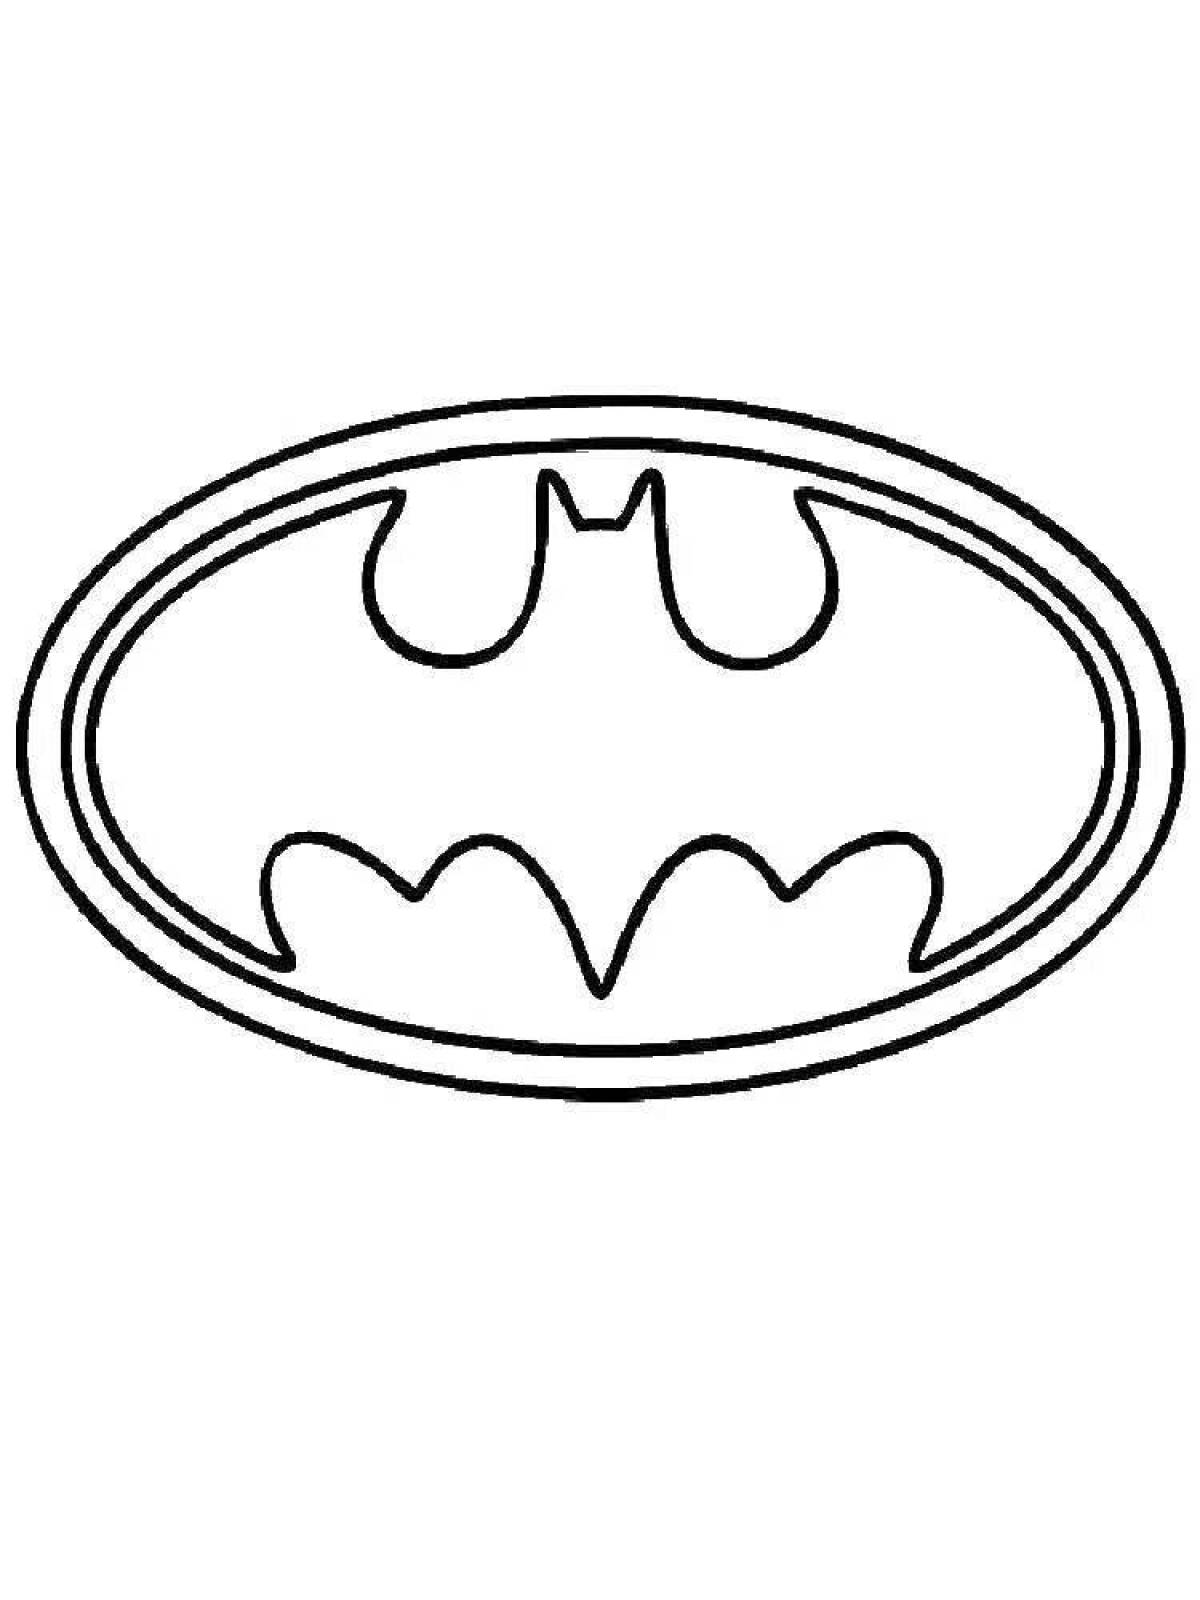 Unique icons for coloring pages